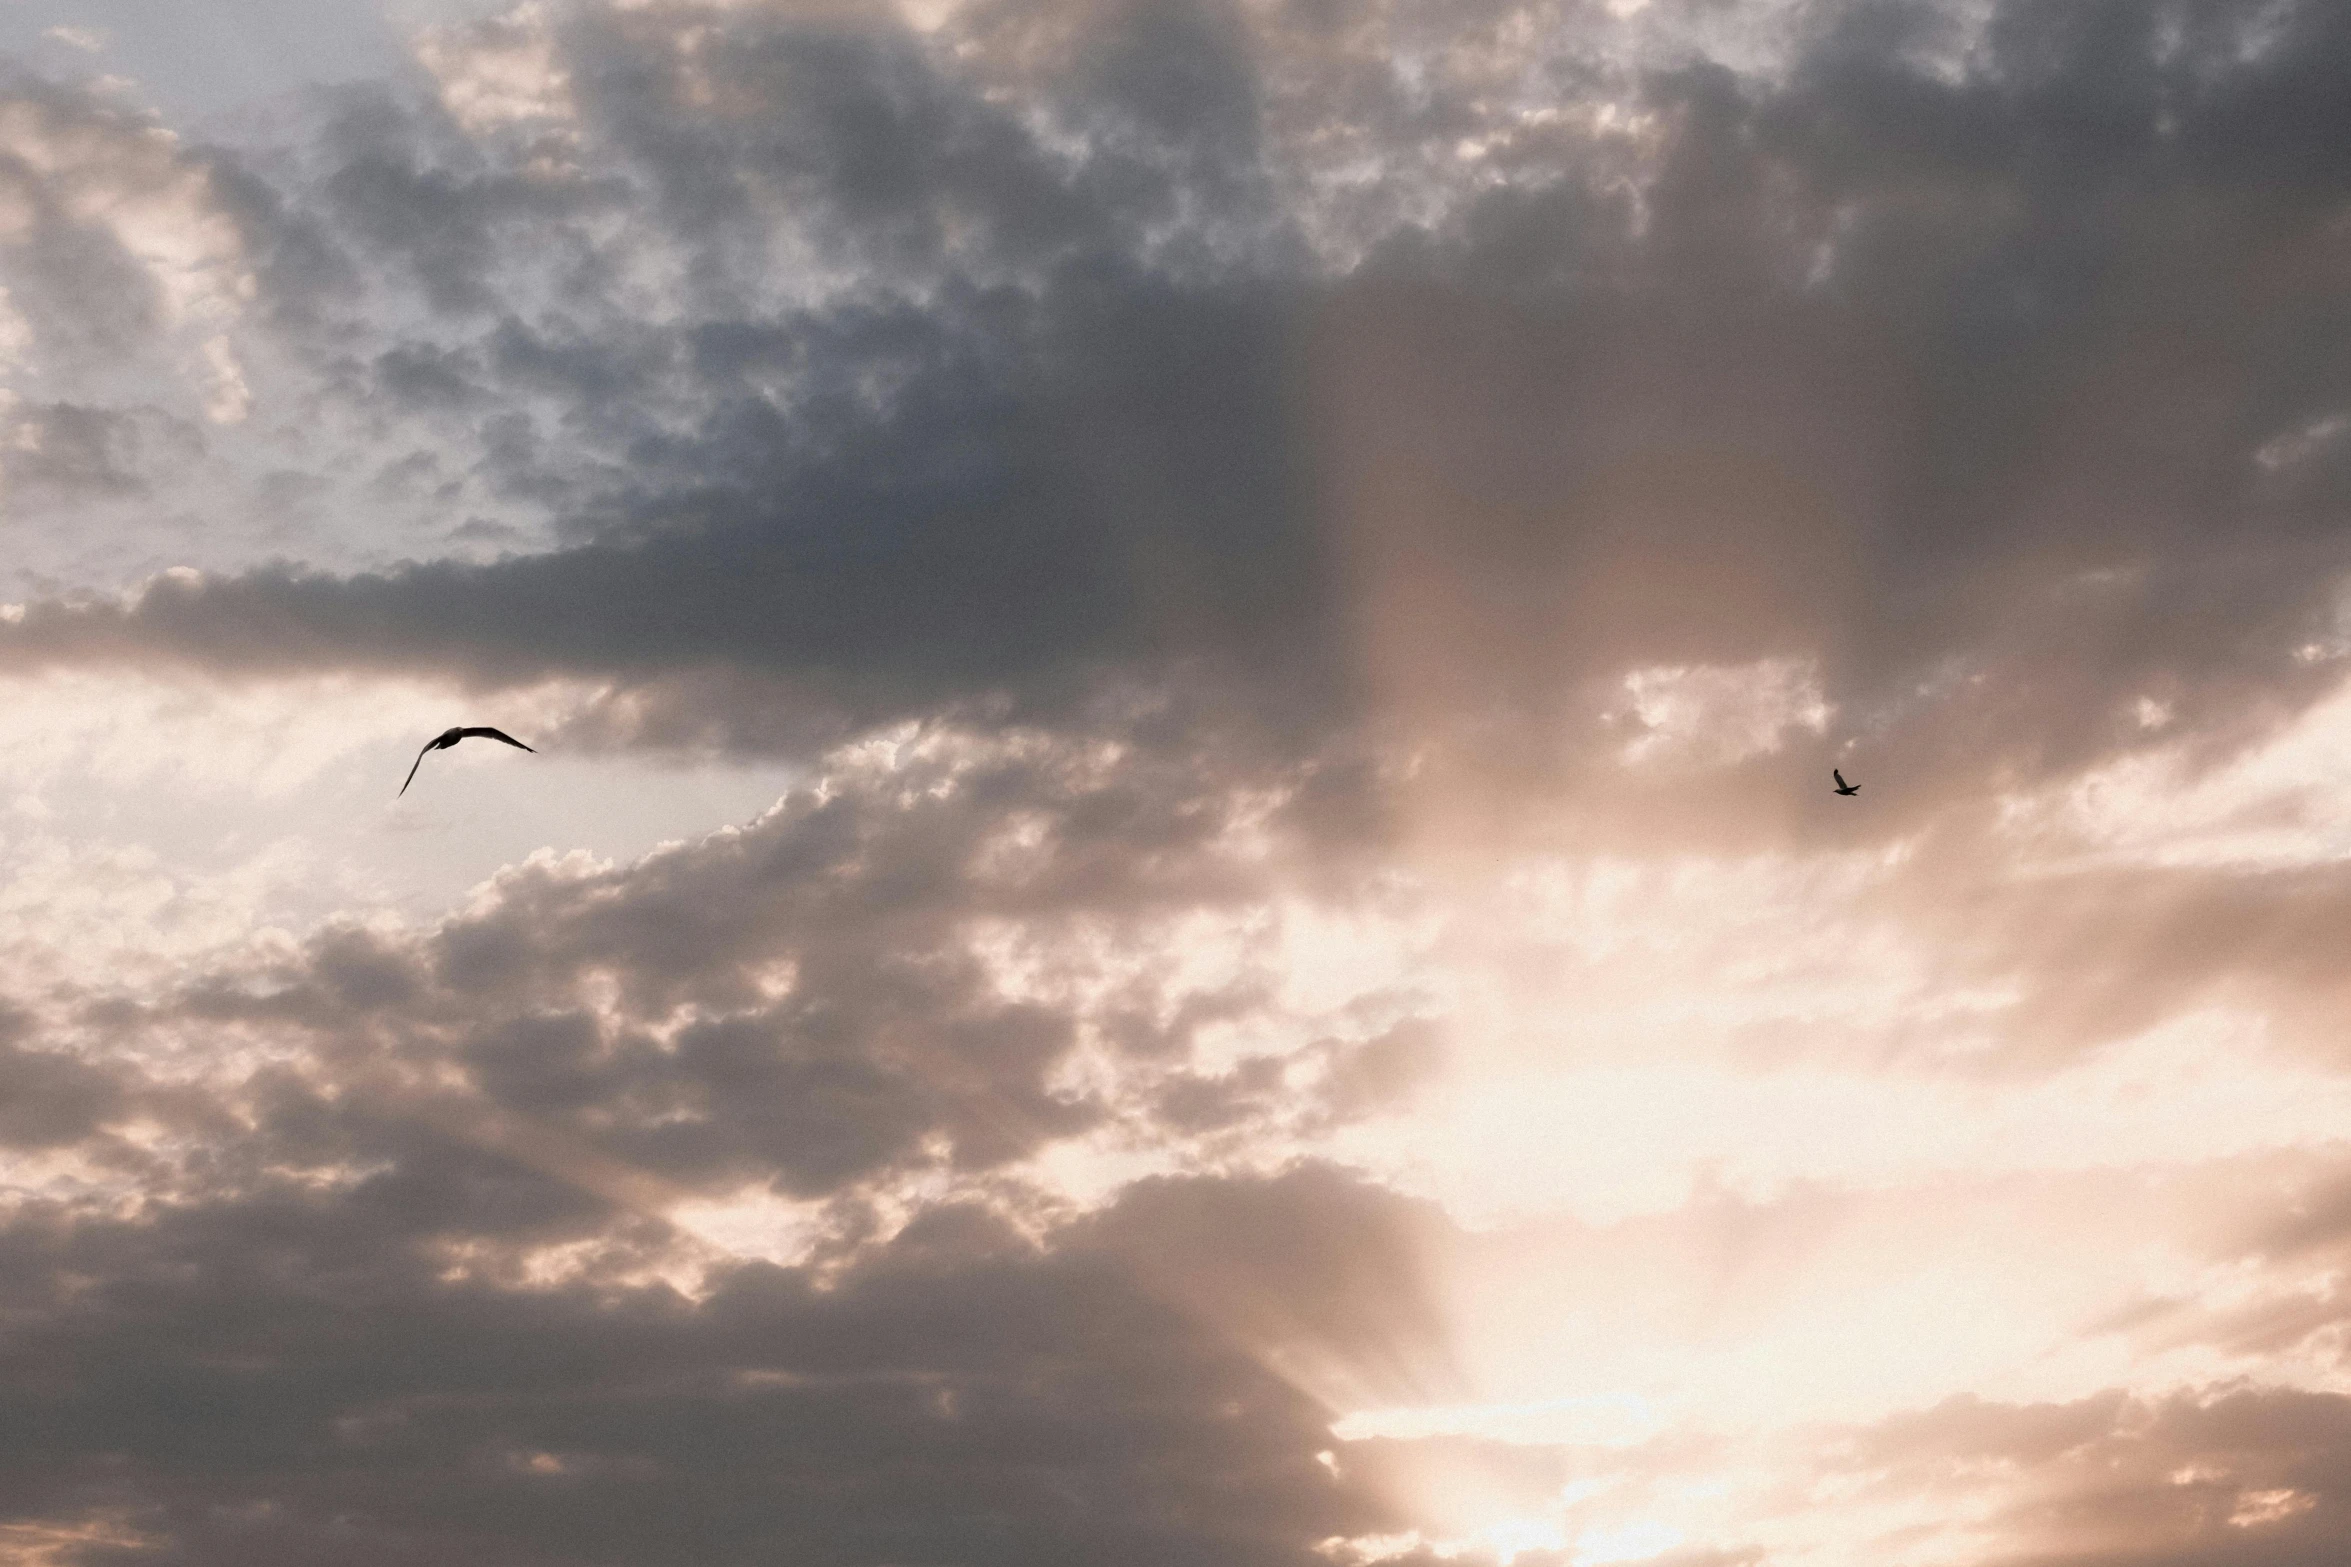 birds flying against the clouds during a cloudy sunset